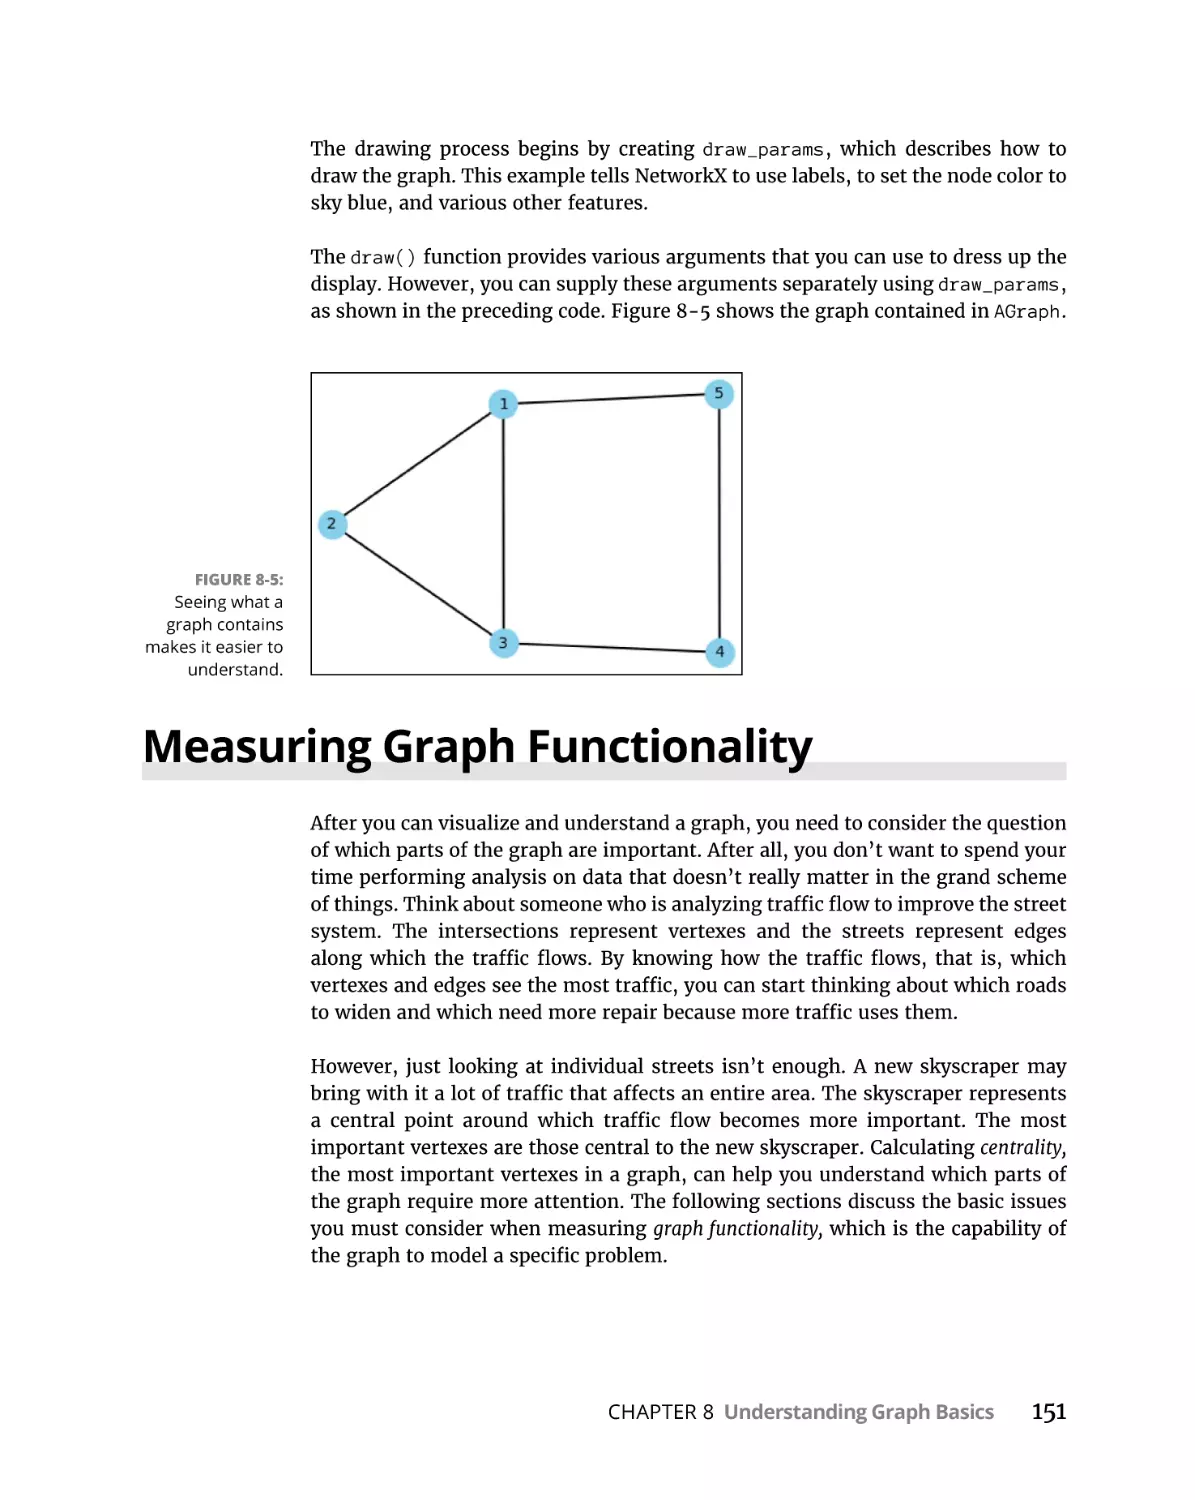 Measuring Graph Functionality